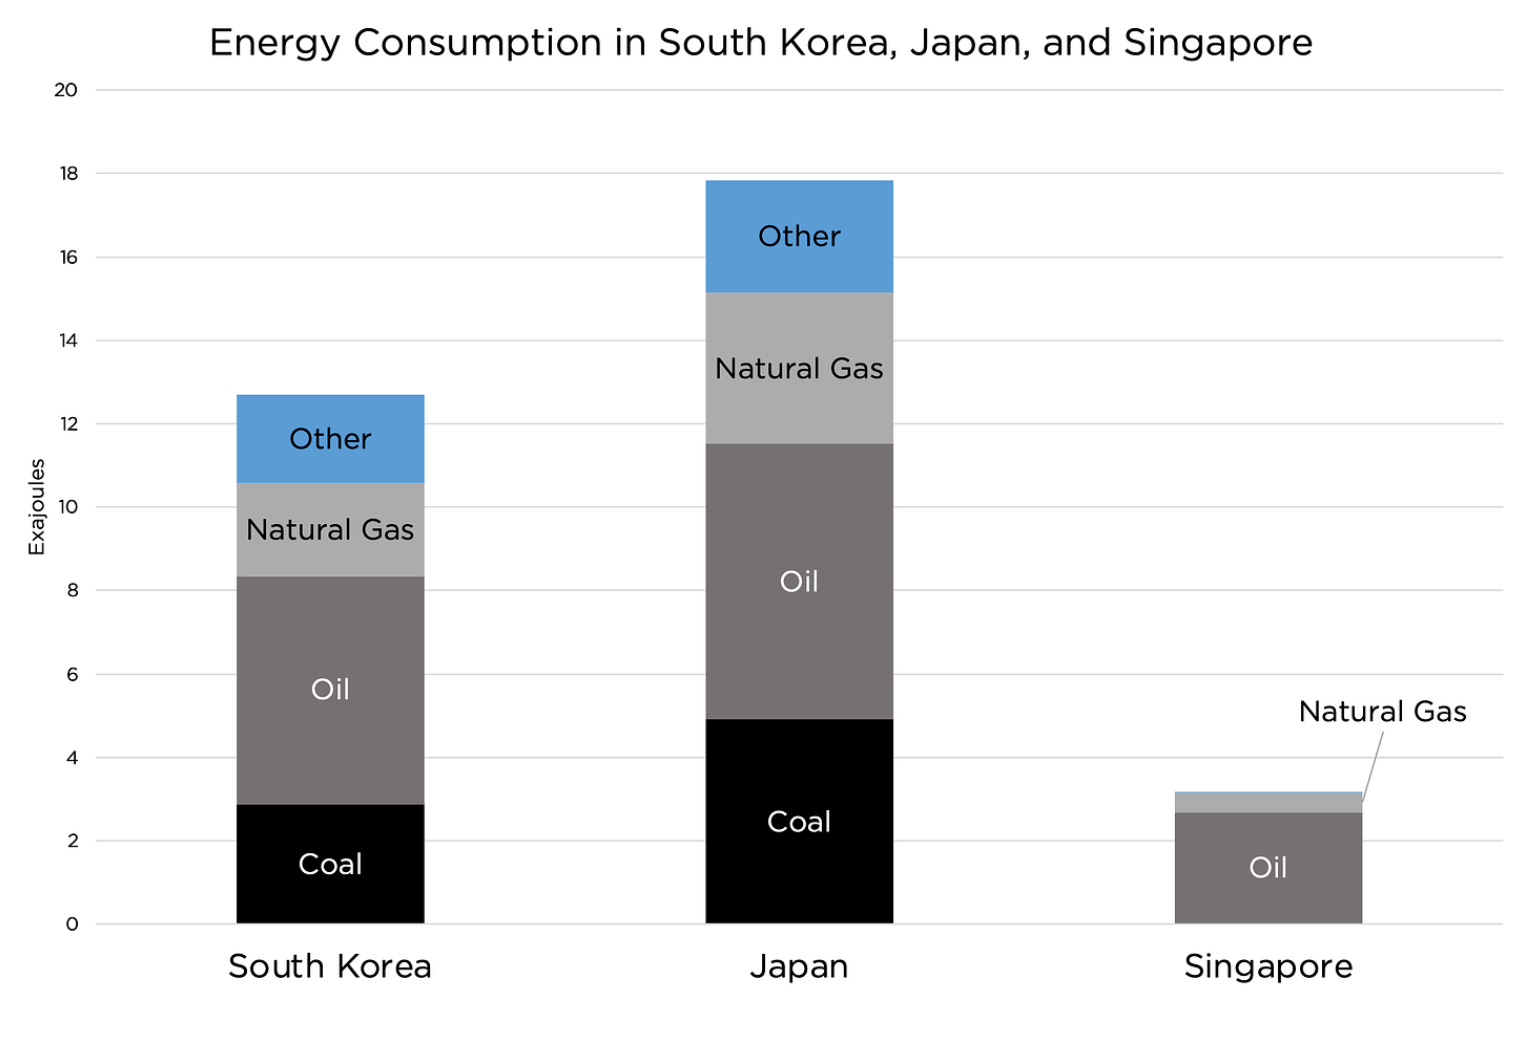 IMAGE 8 - Energy Consumption in South Korea, Japan and Singapore